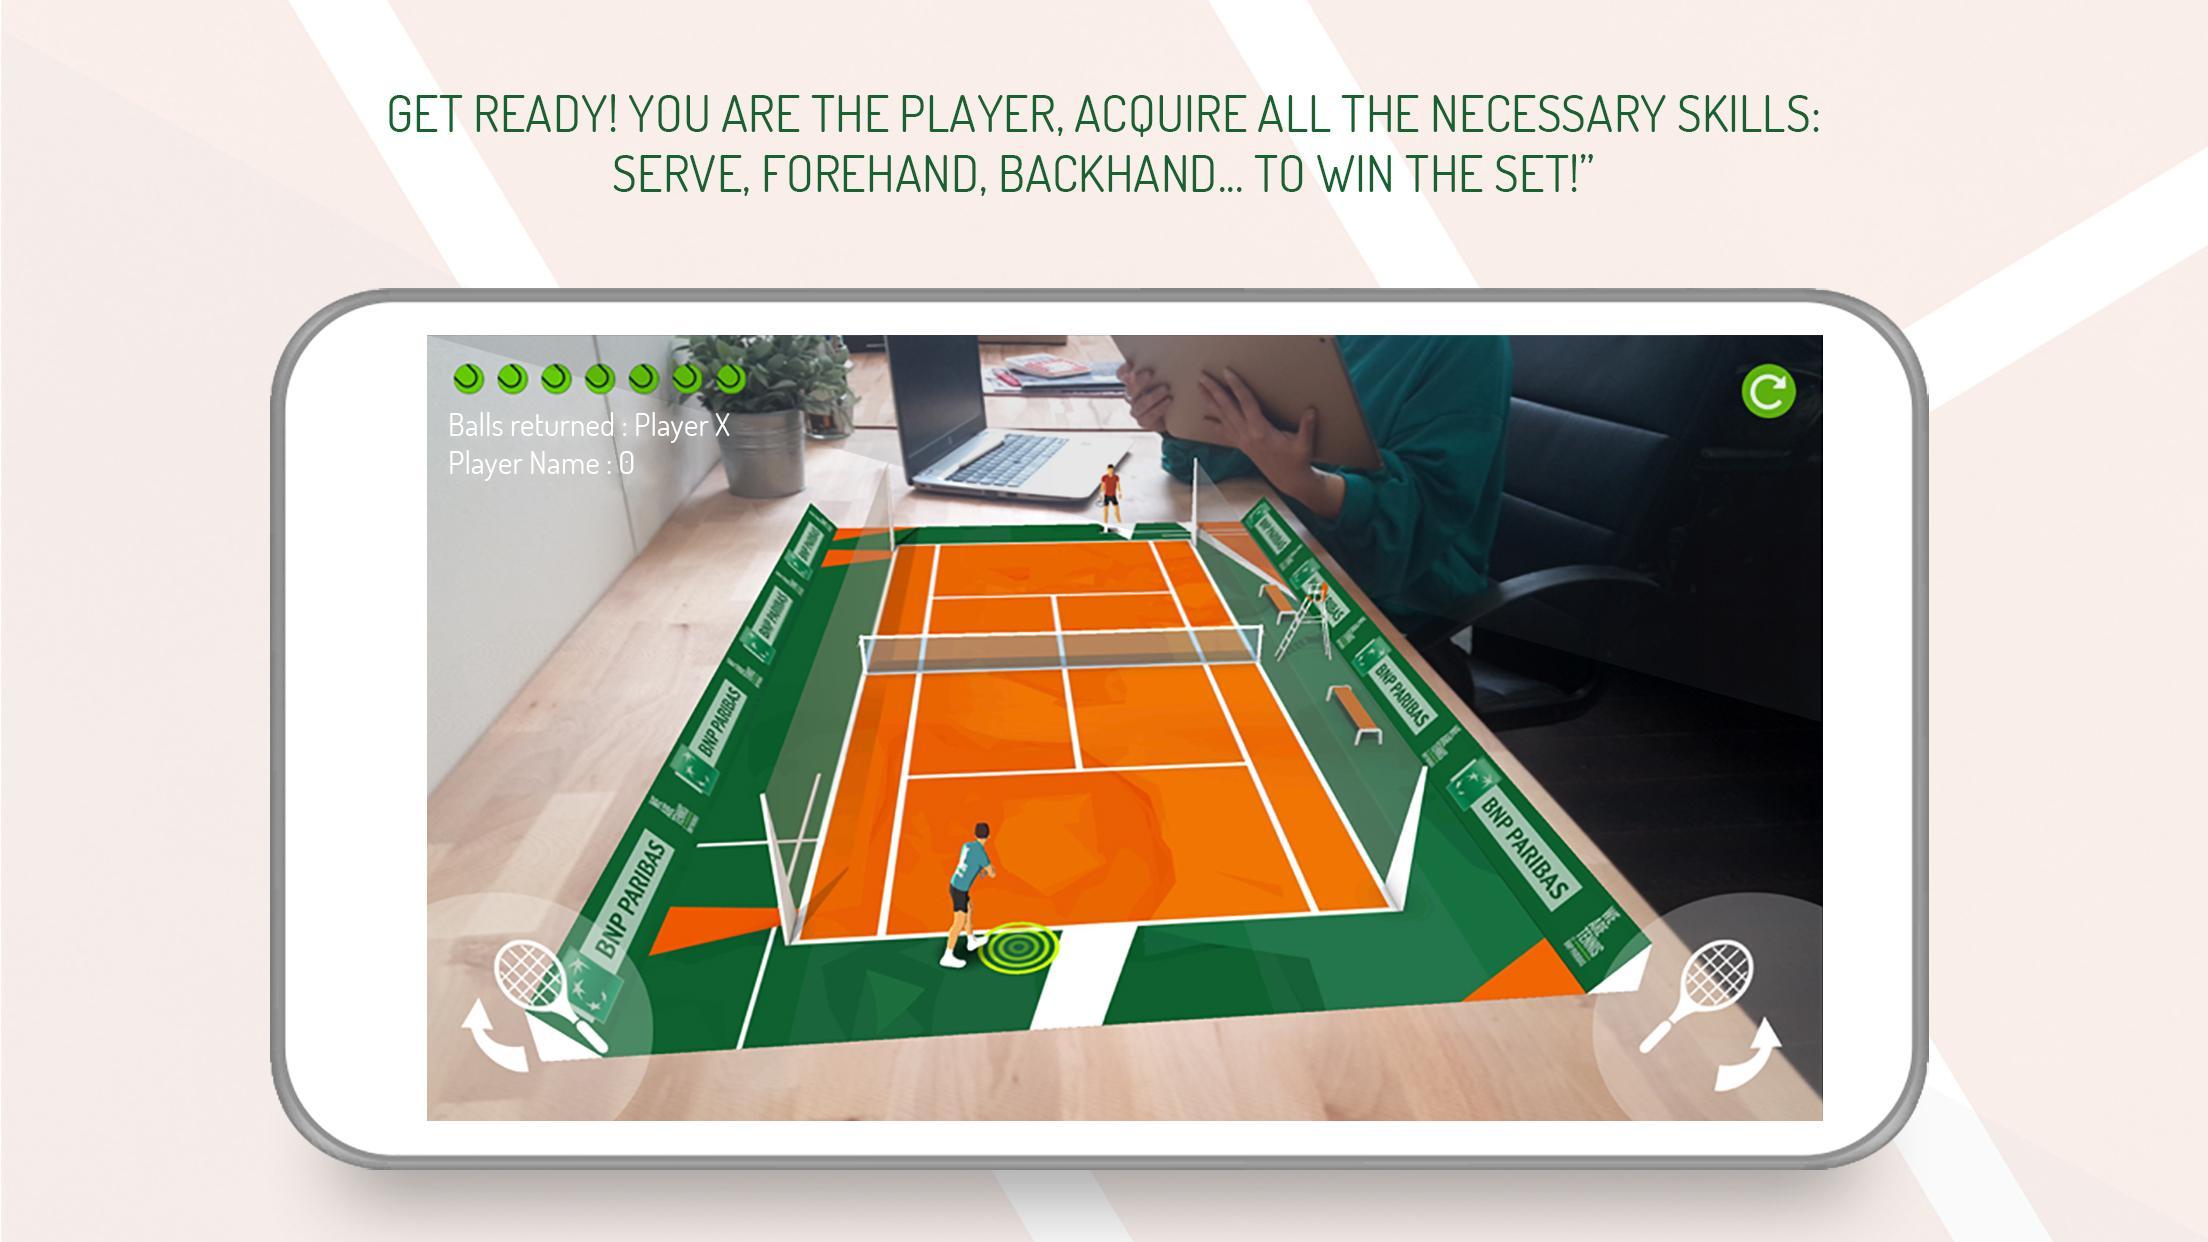 We Are Tennis AR for Android - APK Download